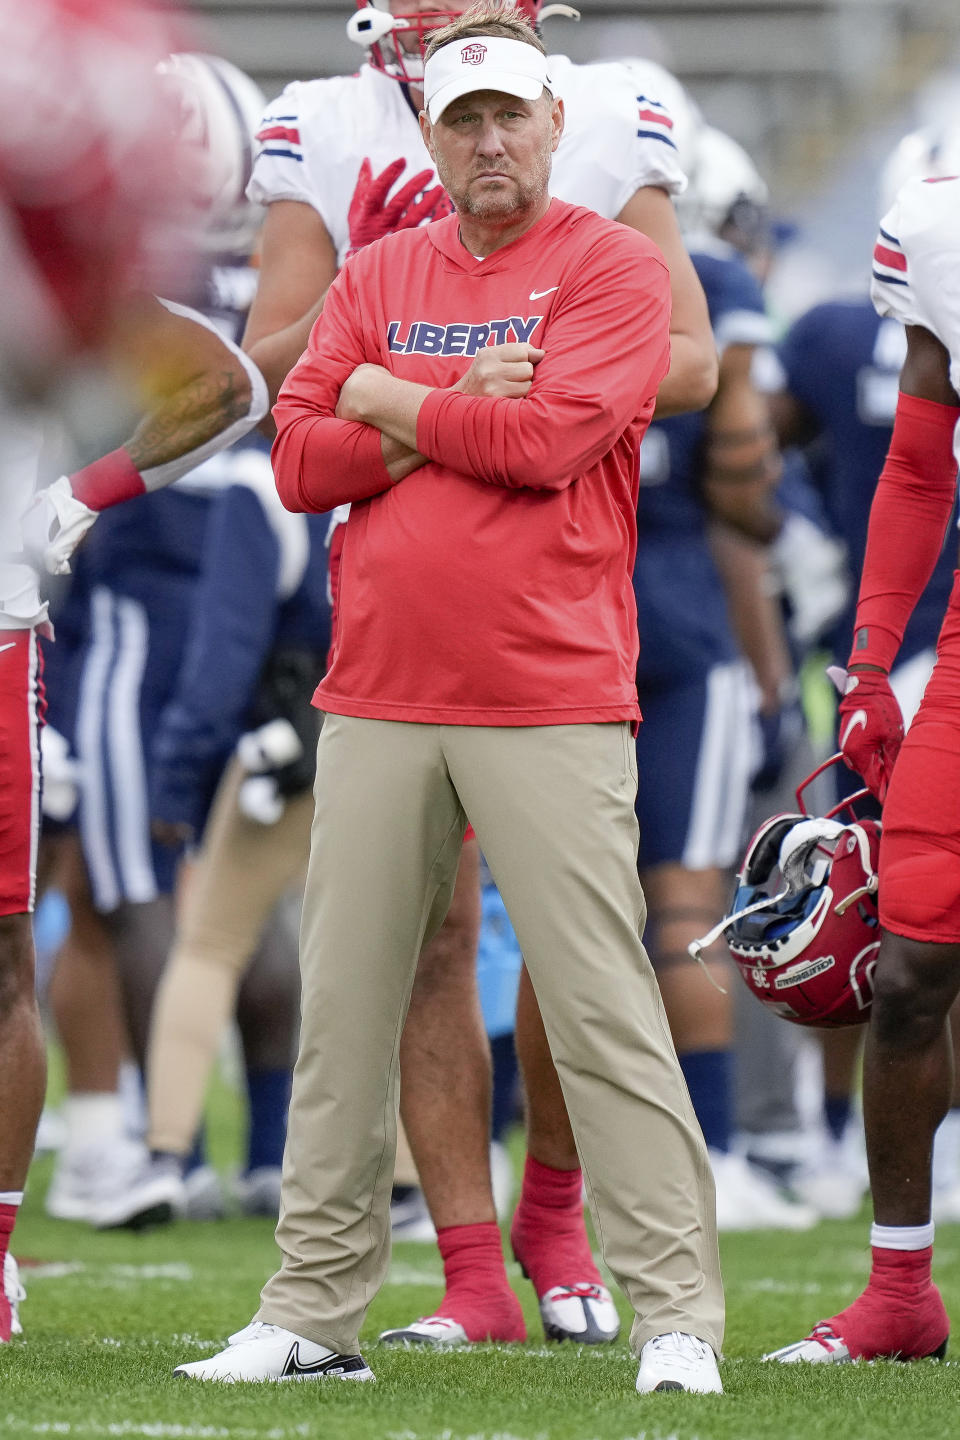 Liberty head coach Hugh Freeze watches as players warm up prior to an NCAA college football game against against the Connecticut in East Hartford, Conn., Saturday, Nov. 12, 2022. (AP Photo / Bryan Woolston)